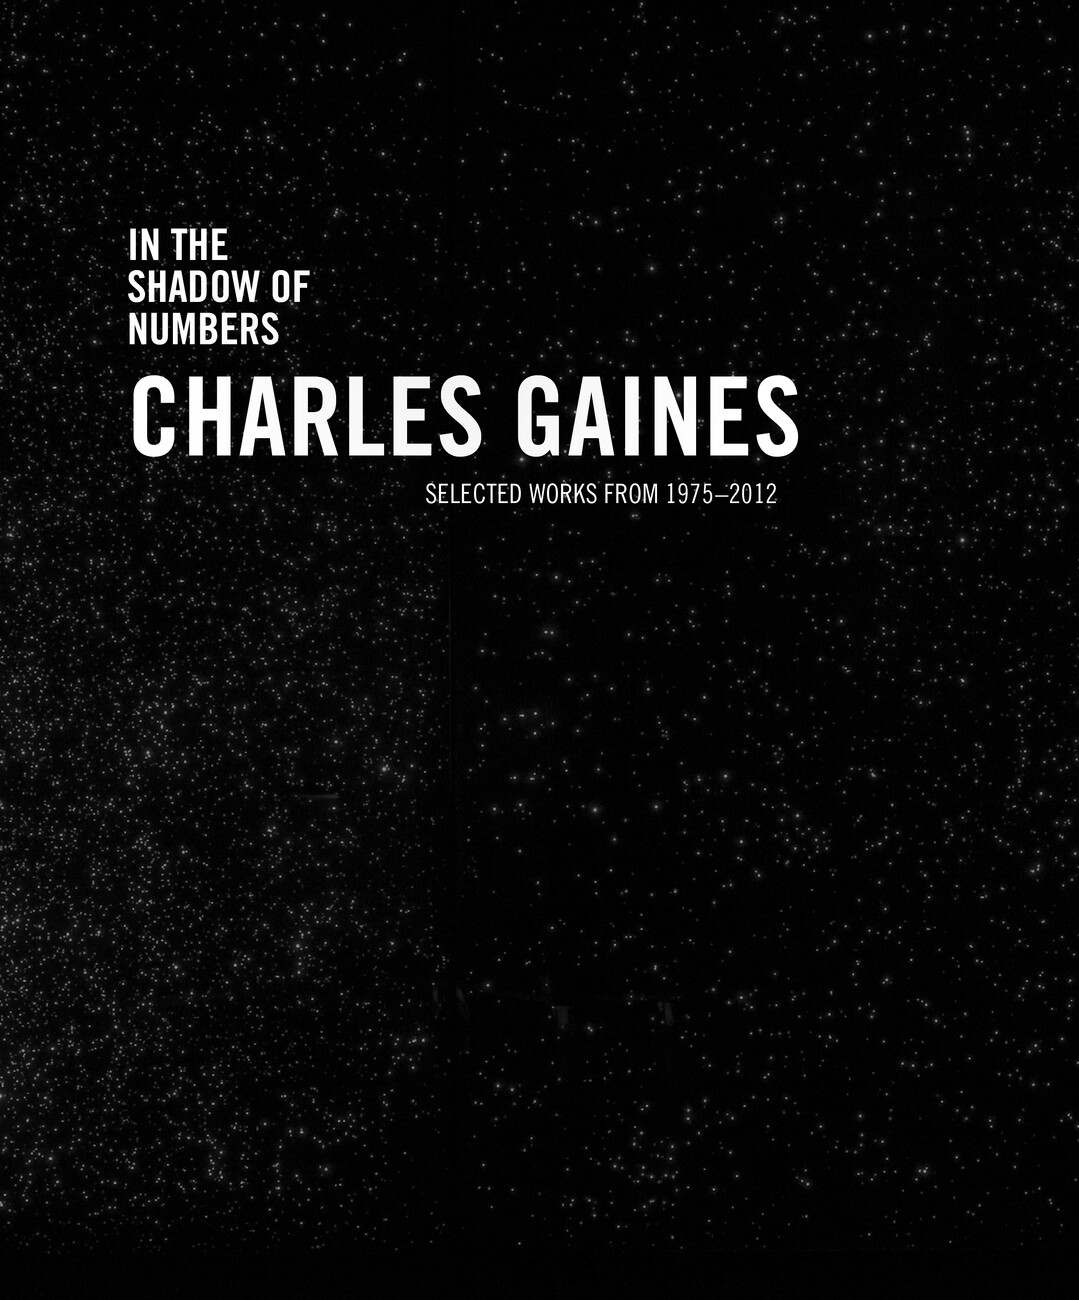 Front cover image for In the Shadow of Numbers: Charles Gaines using his constellation work stars against night sky